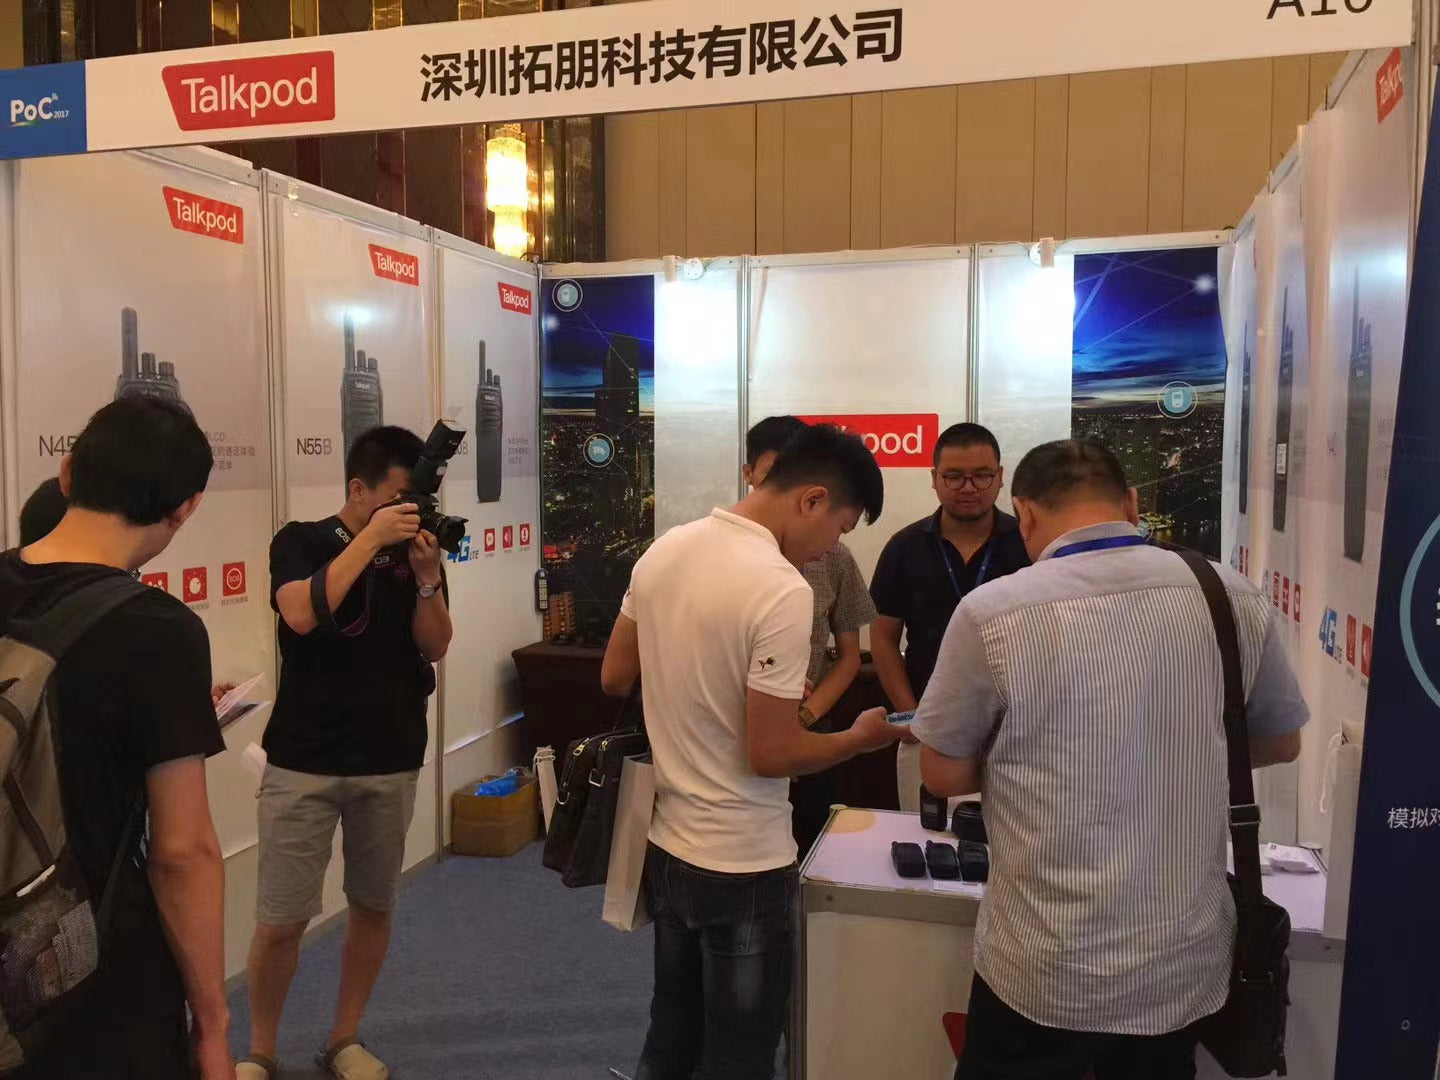 Talkpod's N4 Series Takes Center Stage at the 3rd China Public Network Intercom Industry Chain Conference, Paving the Way for a New Era of Public Network Communication